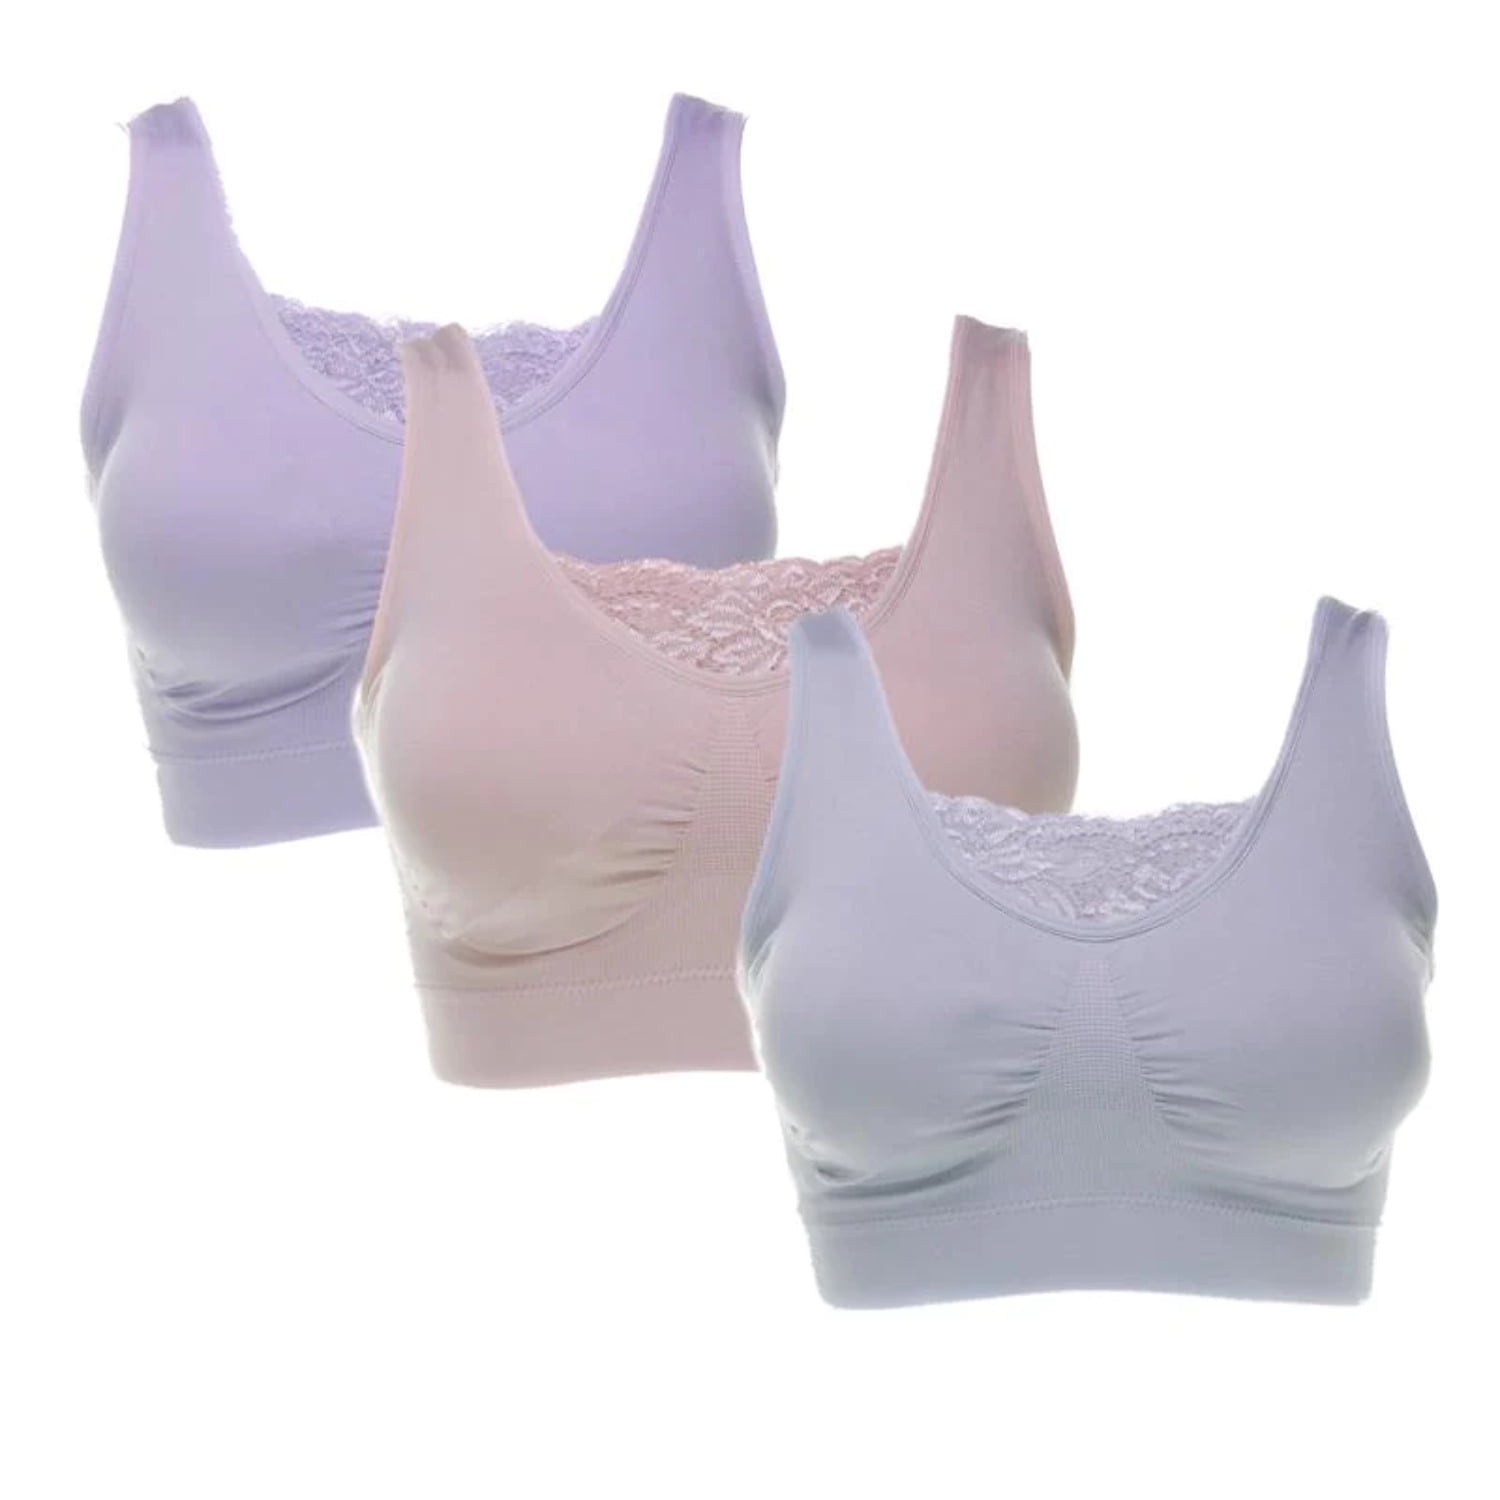 Rhonda Shear Ahh Bra 3-pack with Lace Inset 